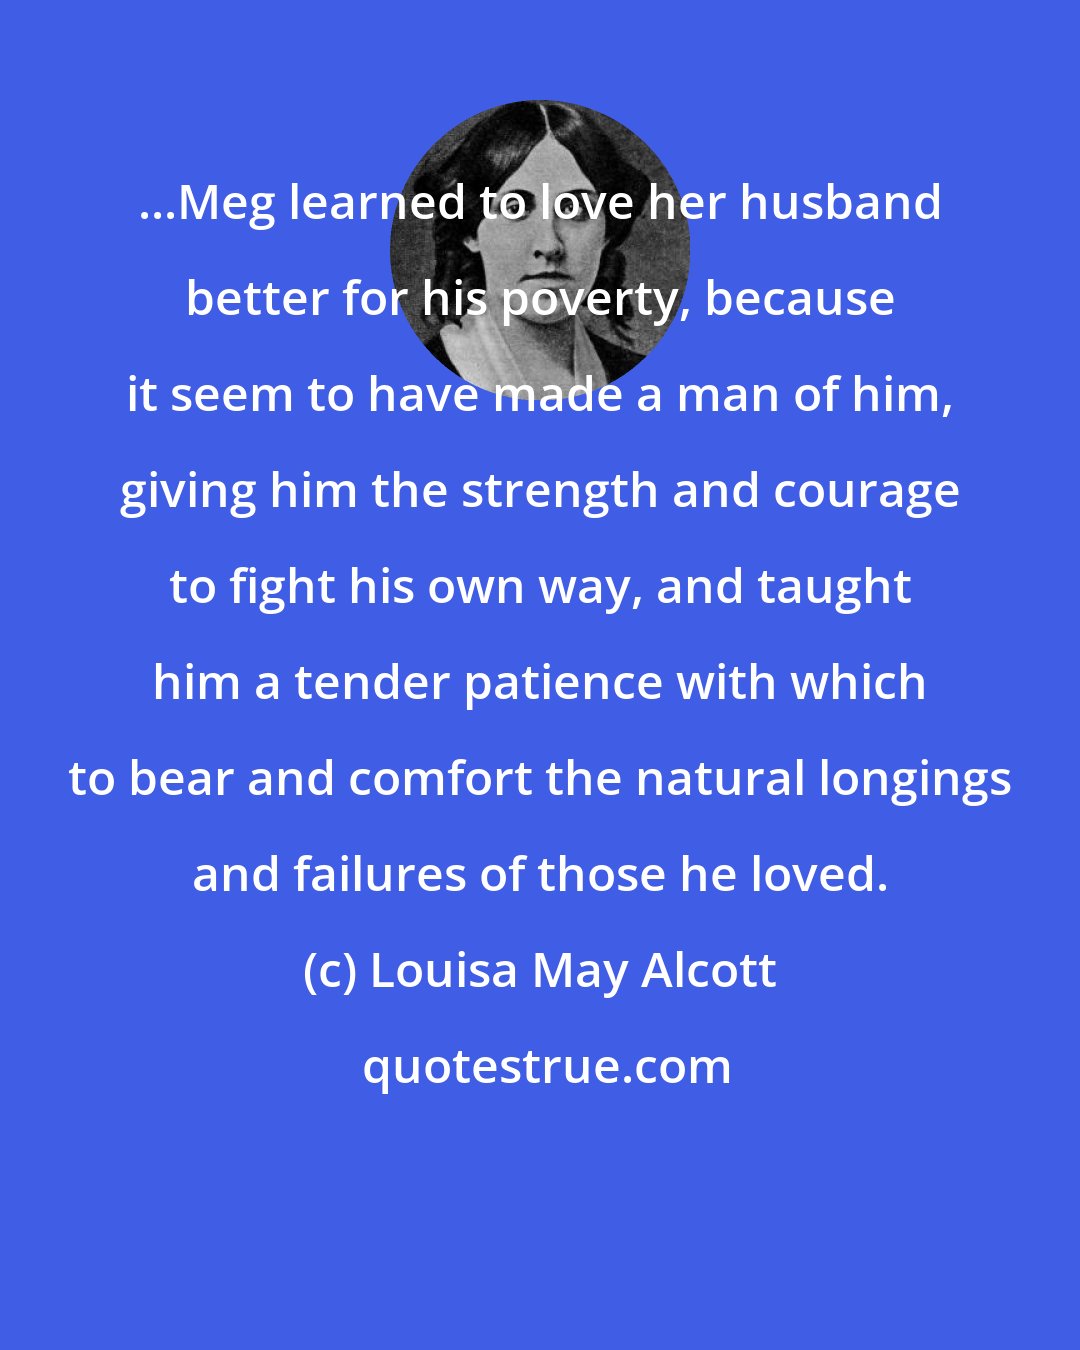 Louisa May Alcott: ...Meg learned to love her husband better for his poverty, because it seem to have made a man of him, giving him the strength and courage to fight his own way, and taught him a tender patience with which to bear and comfort the natural longings and failures of those he loved.